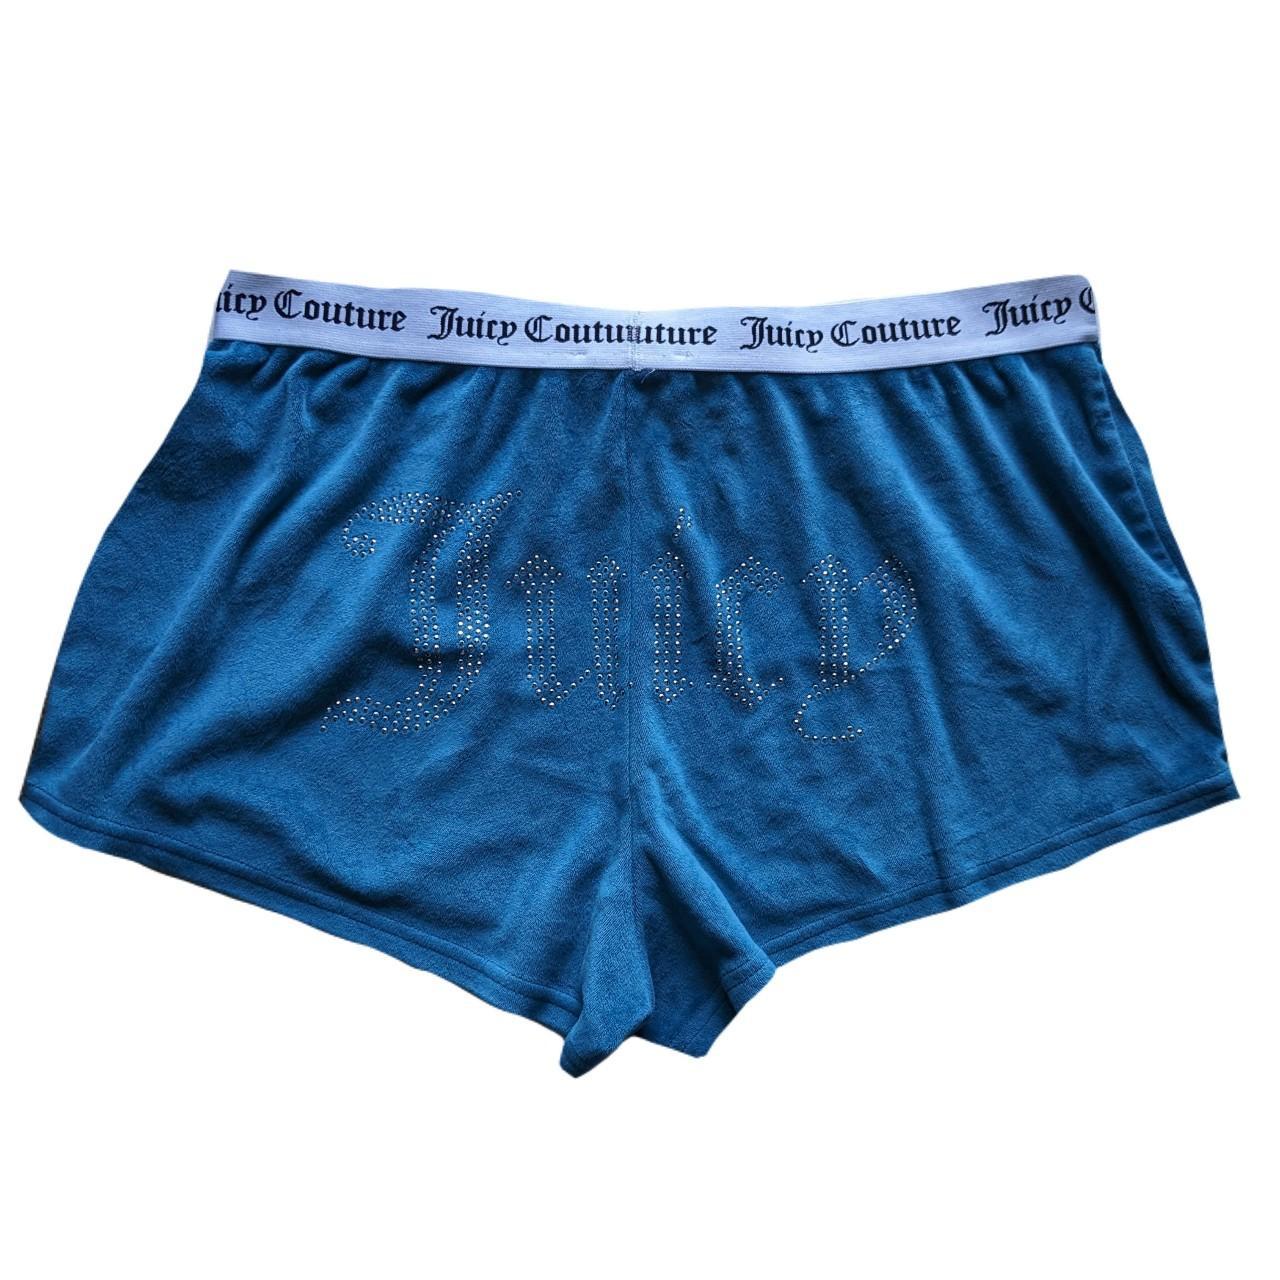 Juicy Couture Boxers